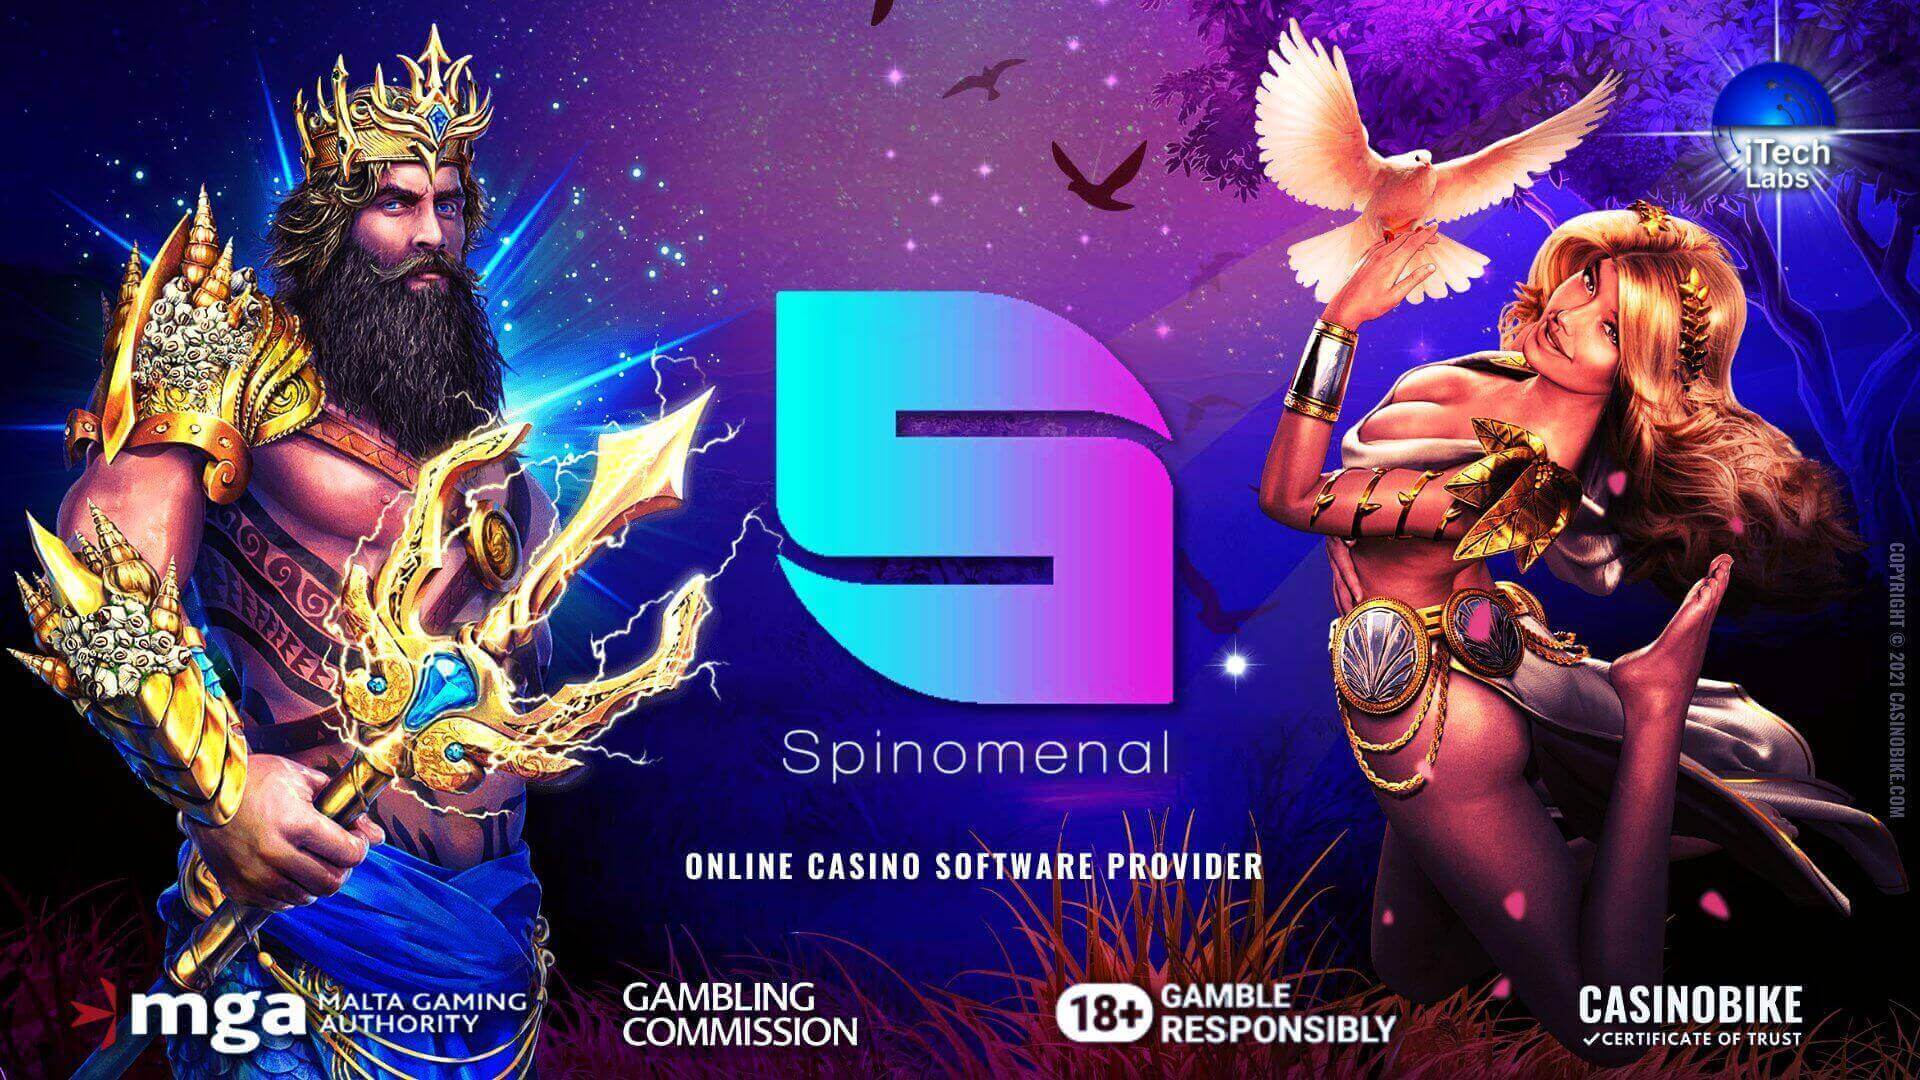 Spinomenal Online Casino Software Provider Review